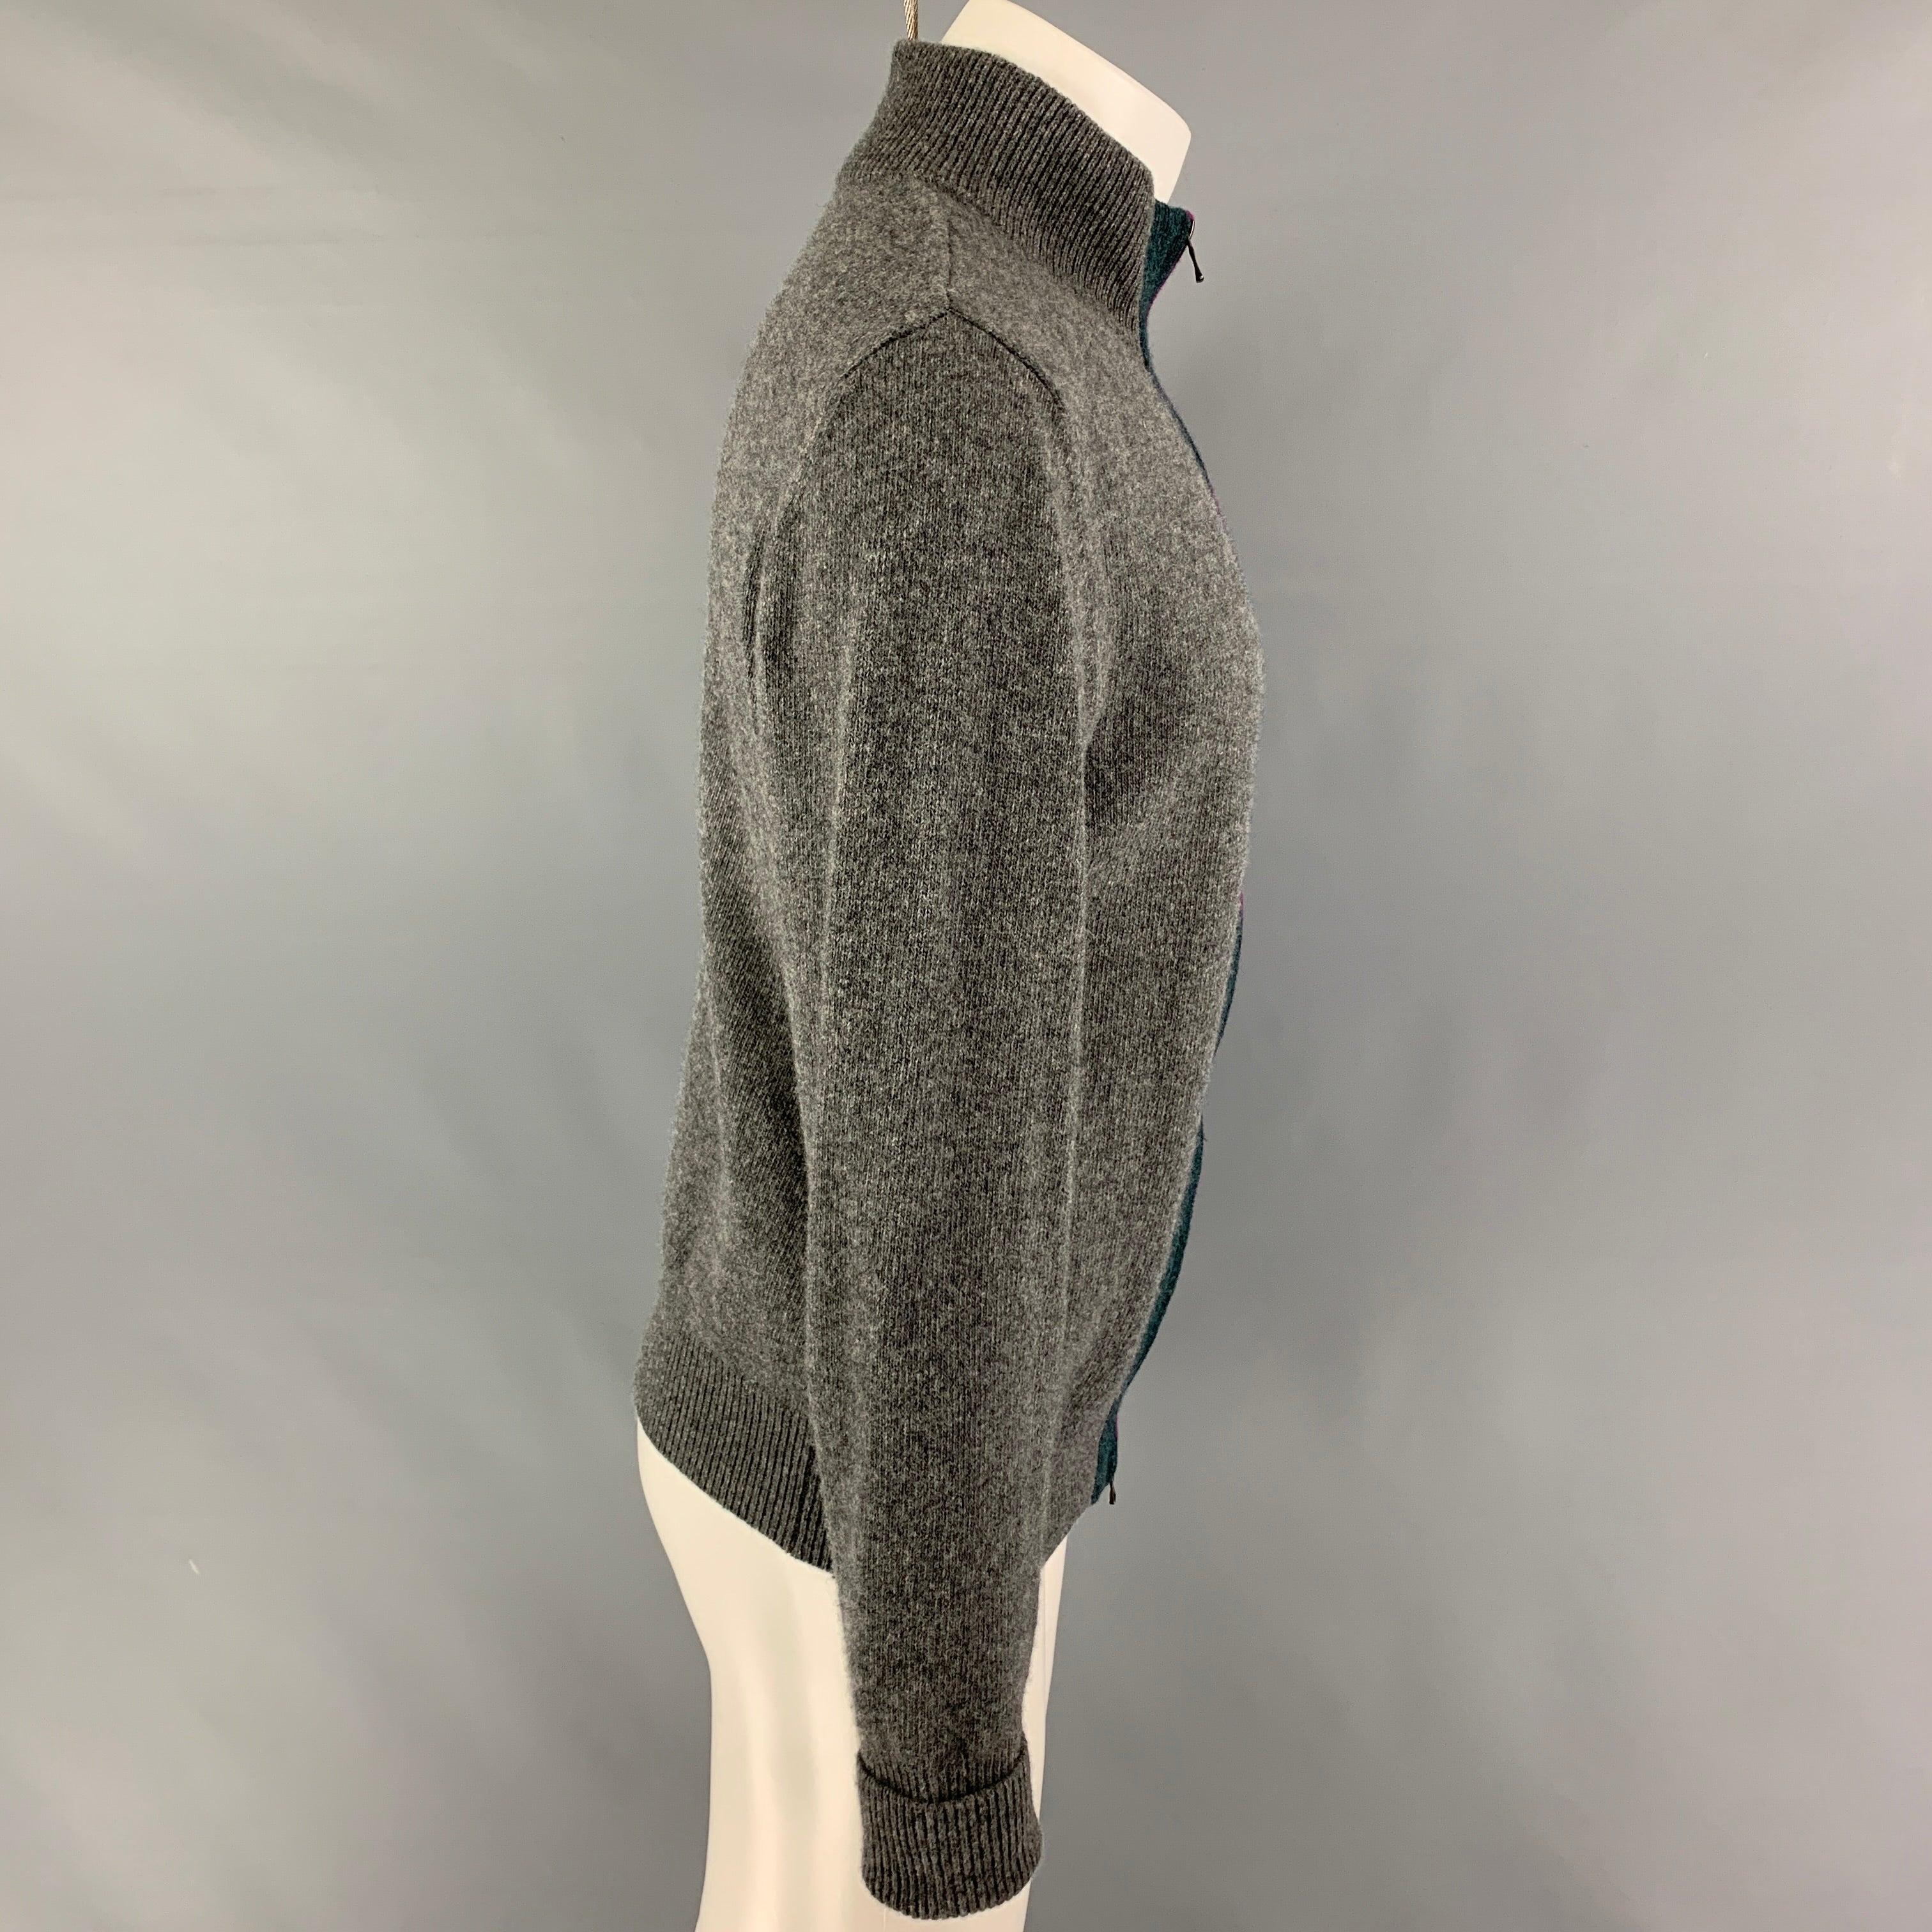 BALLANTYNE cardigan comes in a grey wool featuring a fuchsia & navy color block stripe design, high collar, and a full zip up closure. Made in Italy. Very Good
Pre-Owned Condition.  

Marked:   50 

Measurements: 
 
Shoulder:
17.5 inches  Chest:
40